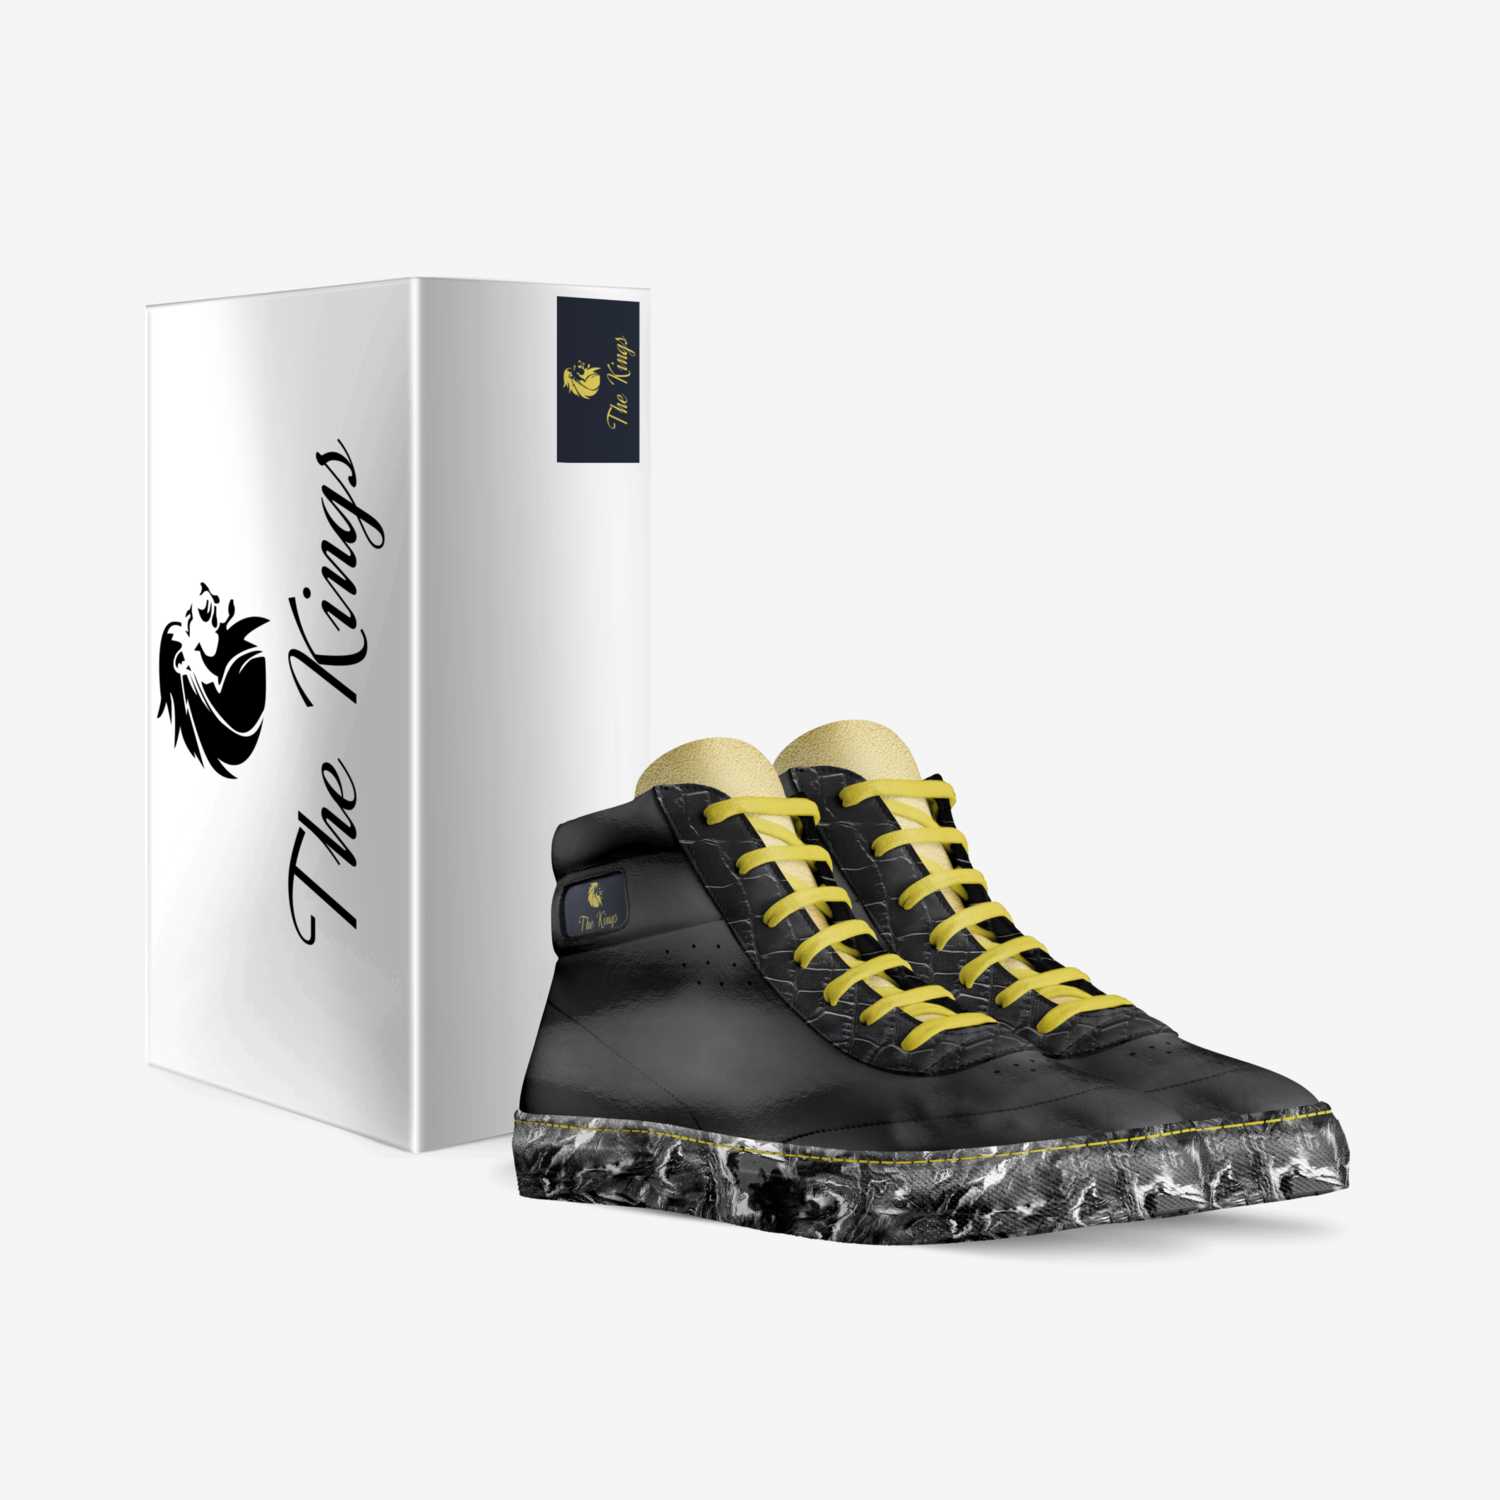 Elites Of Tomorrow custom made in Italy shoes by Ahmed F M Hamdan | Box view